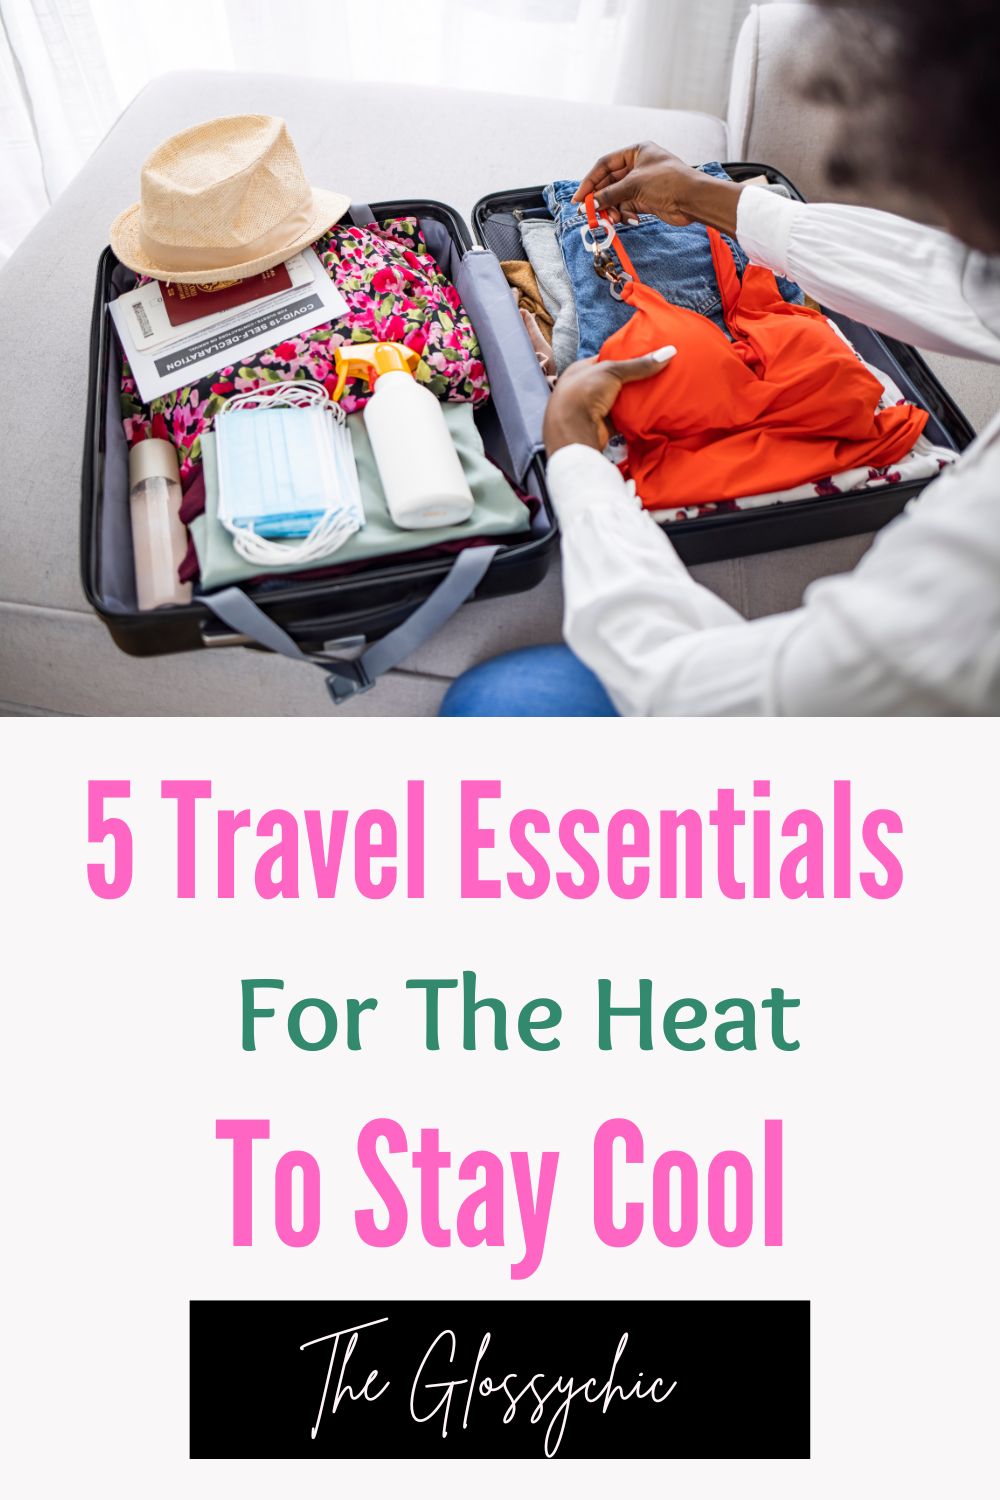 5 Travel Essentials For The Heat To Stay Cool